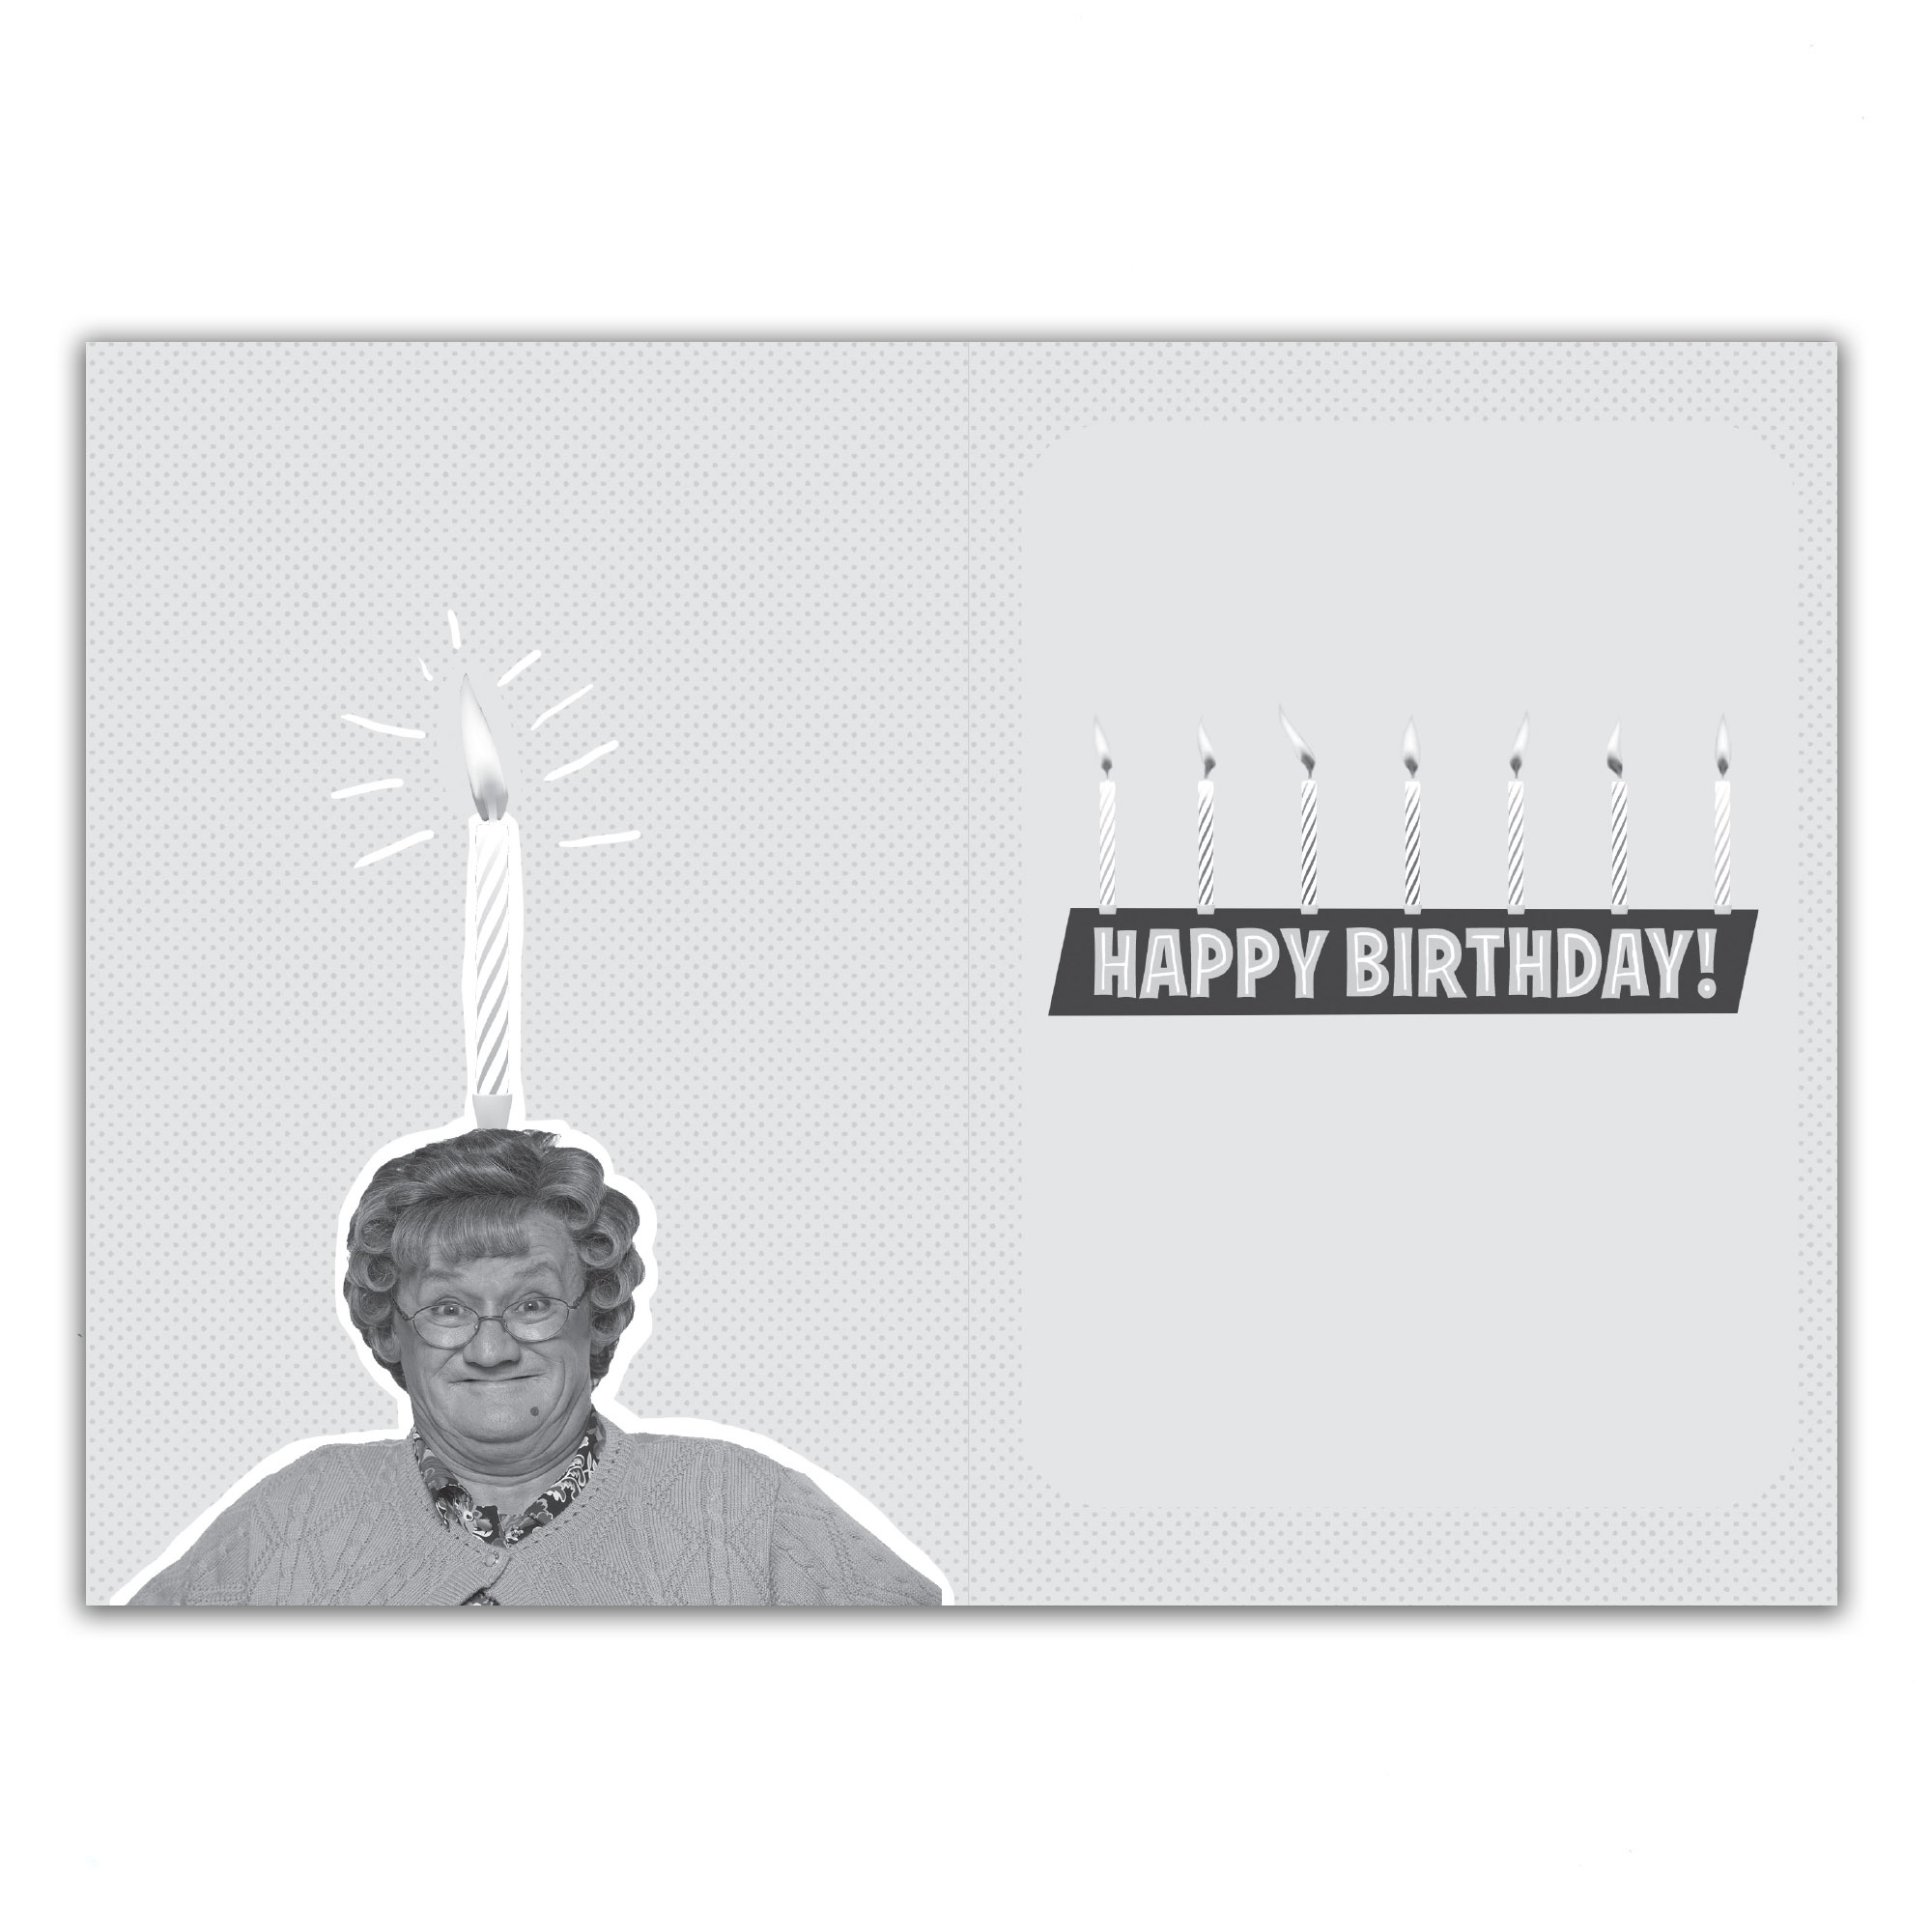 Mrs. Brown's Boys Birthday Card - Lots of Candles